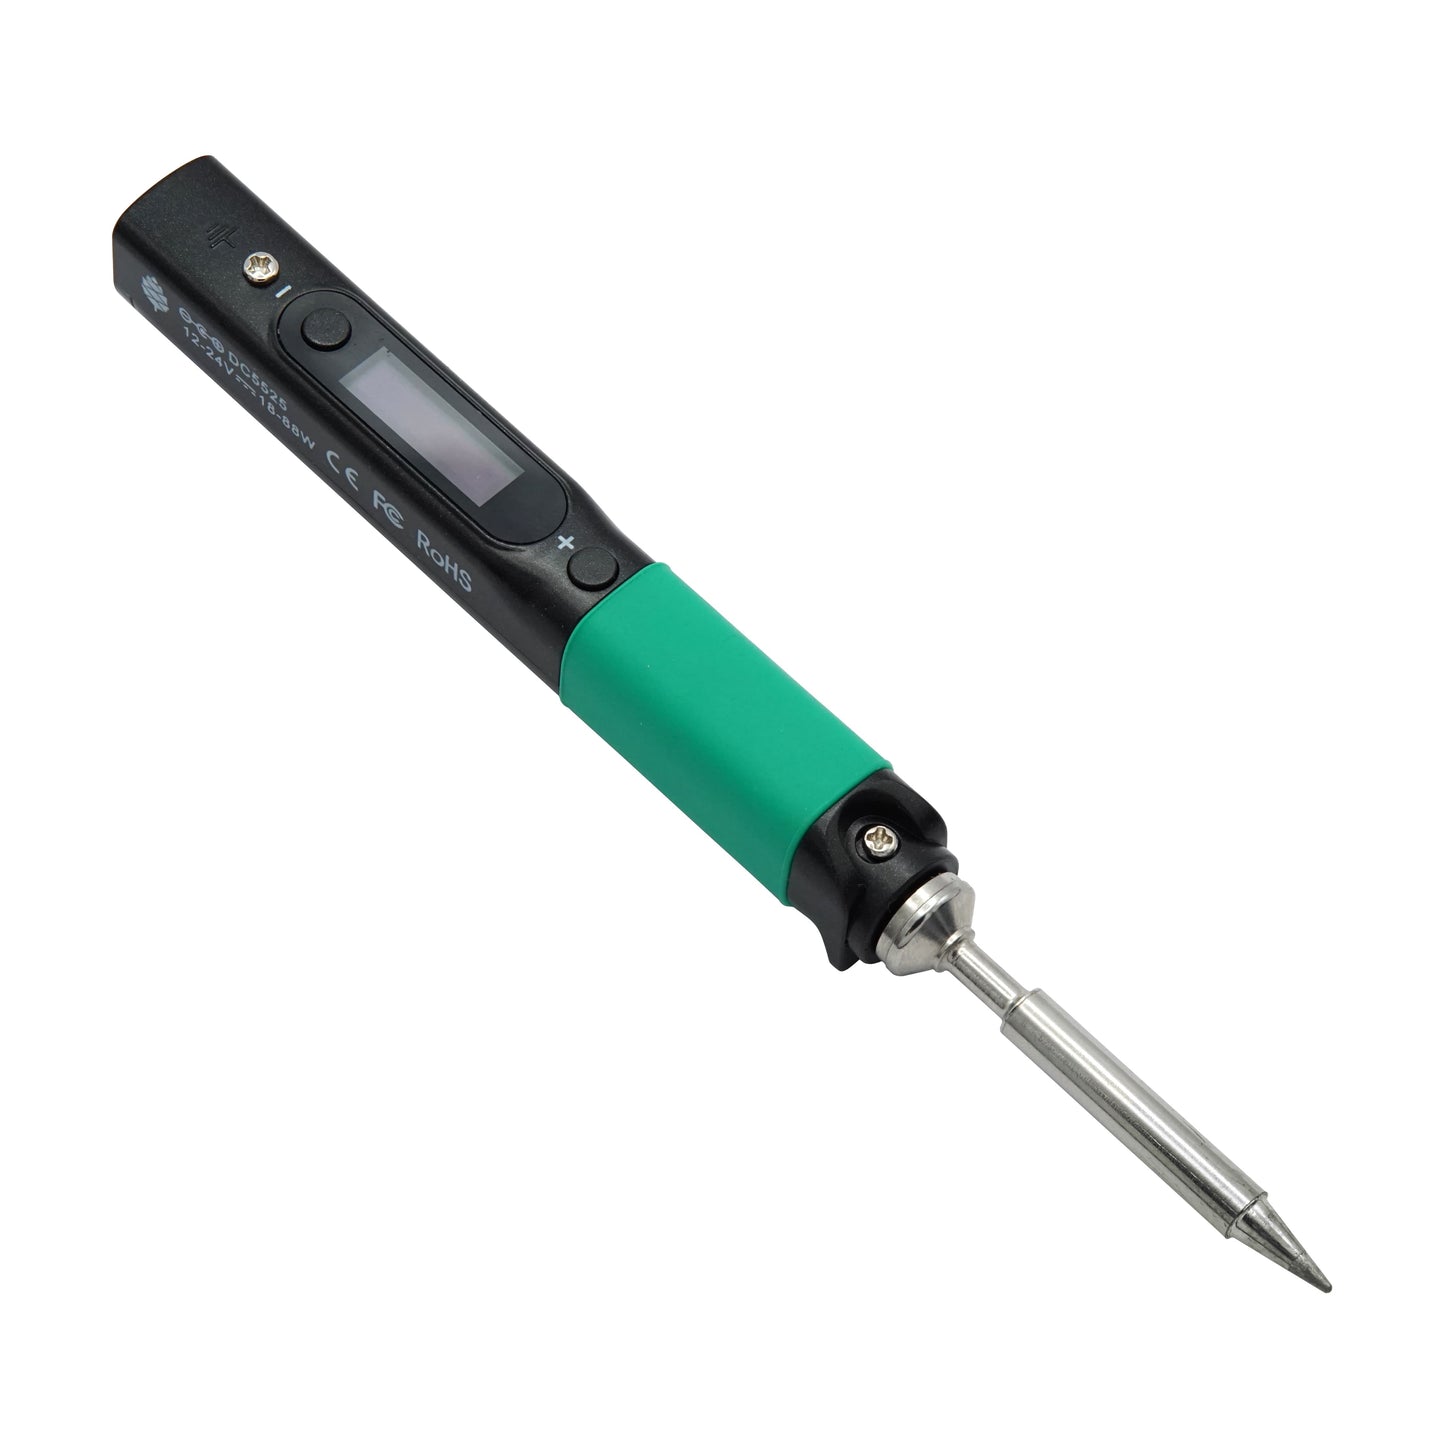 Pinecil V2 Soldering Iron